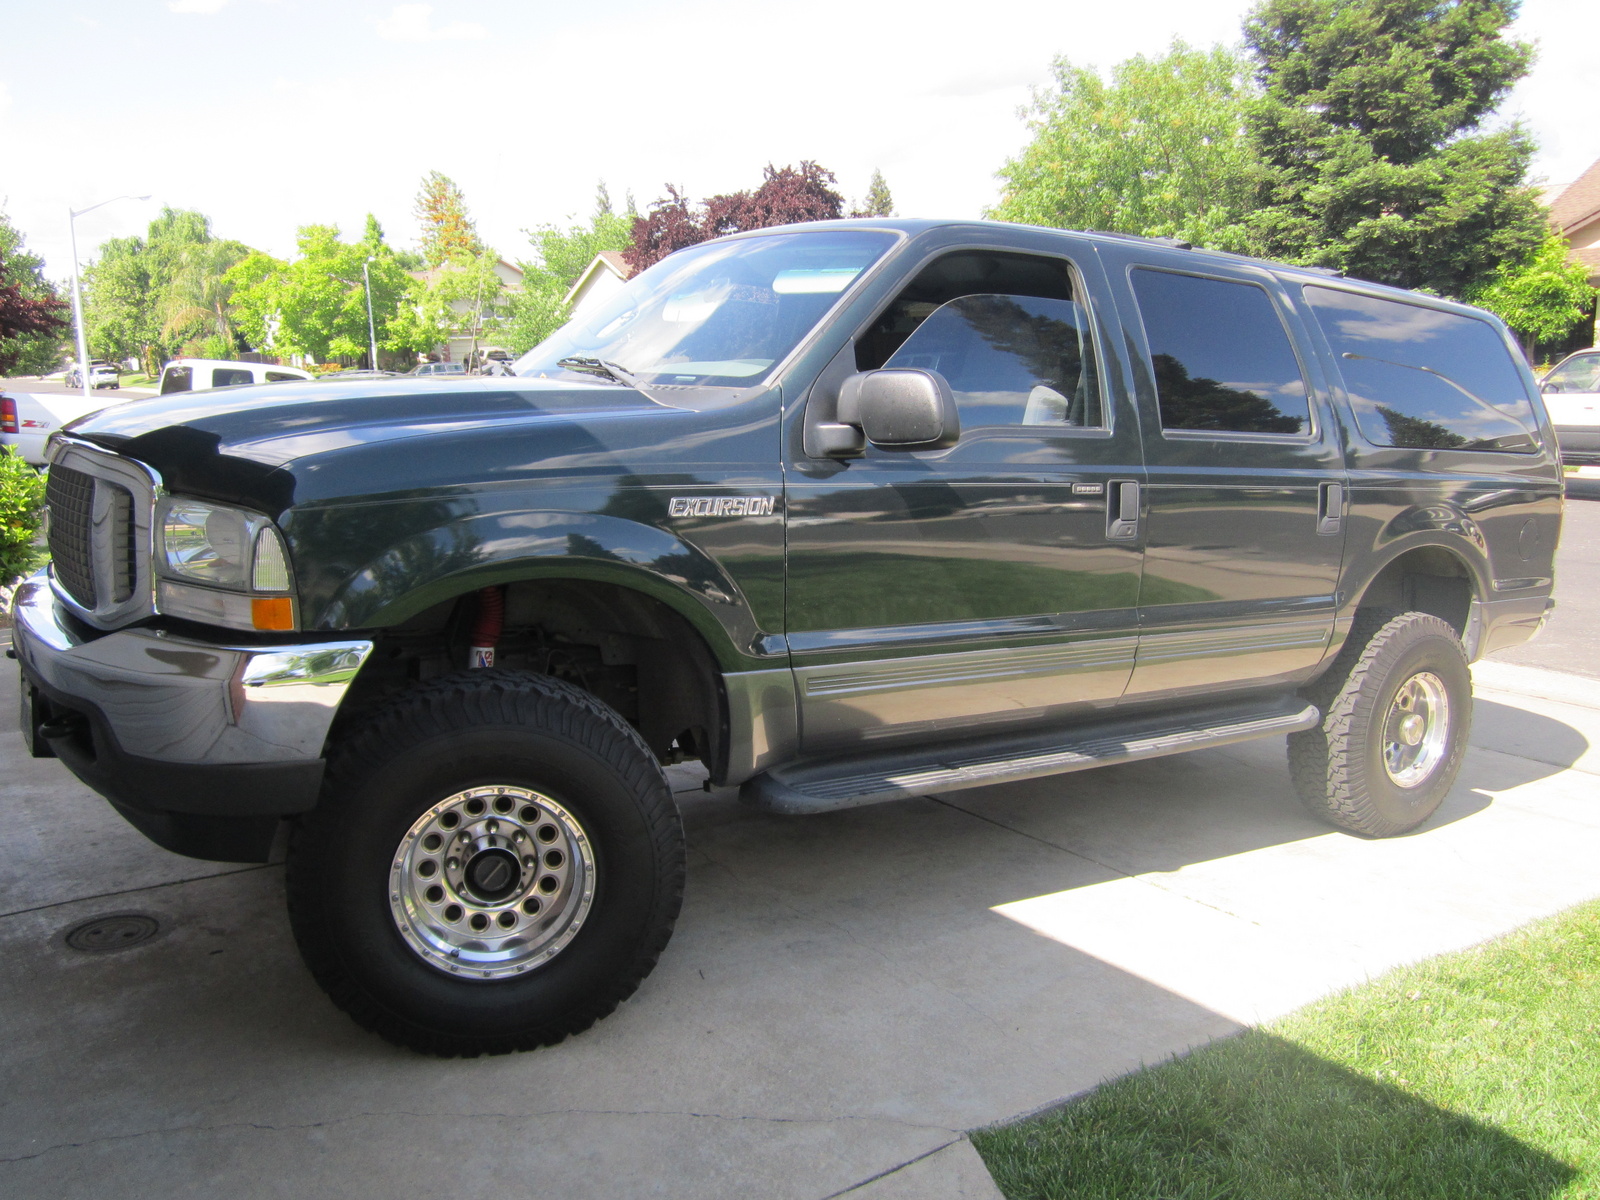 Ford excursion in canada #1